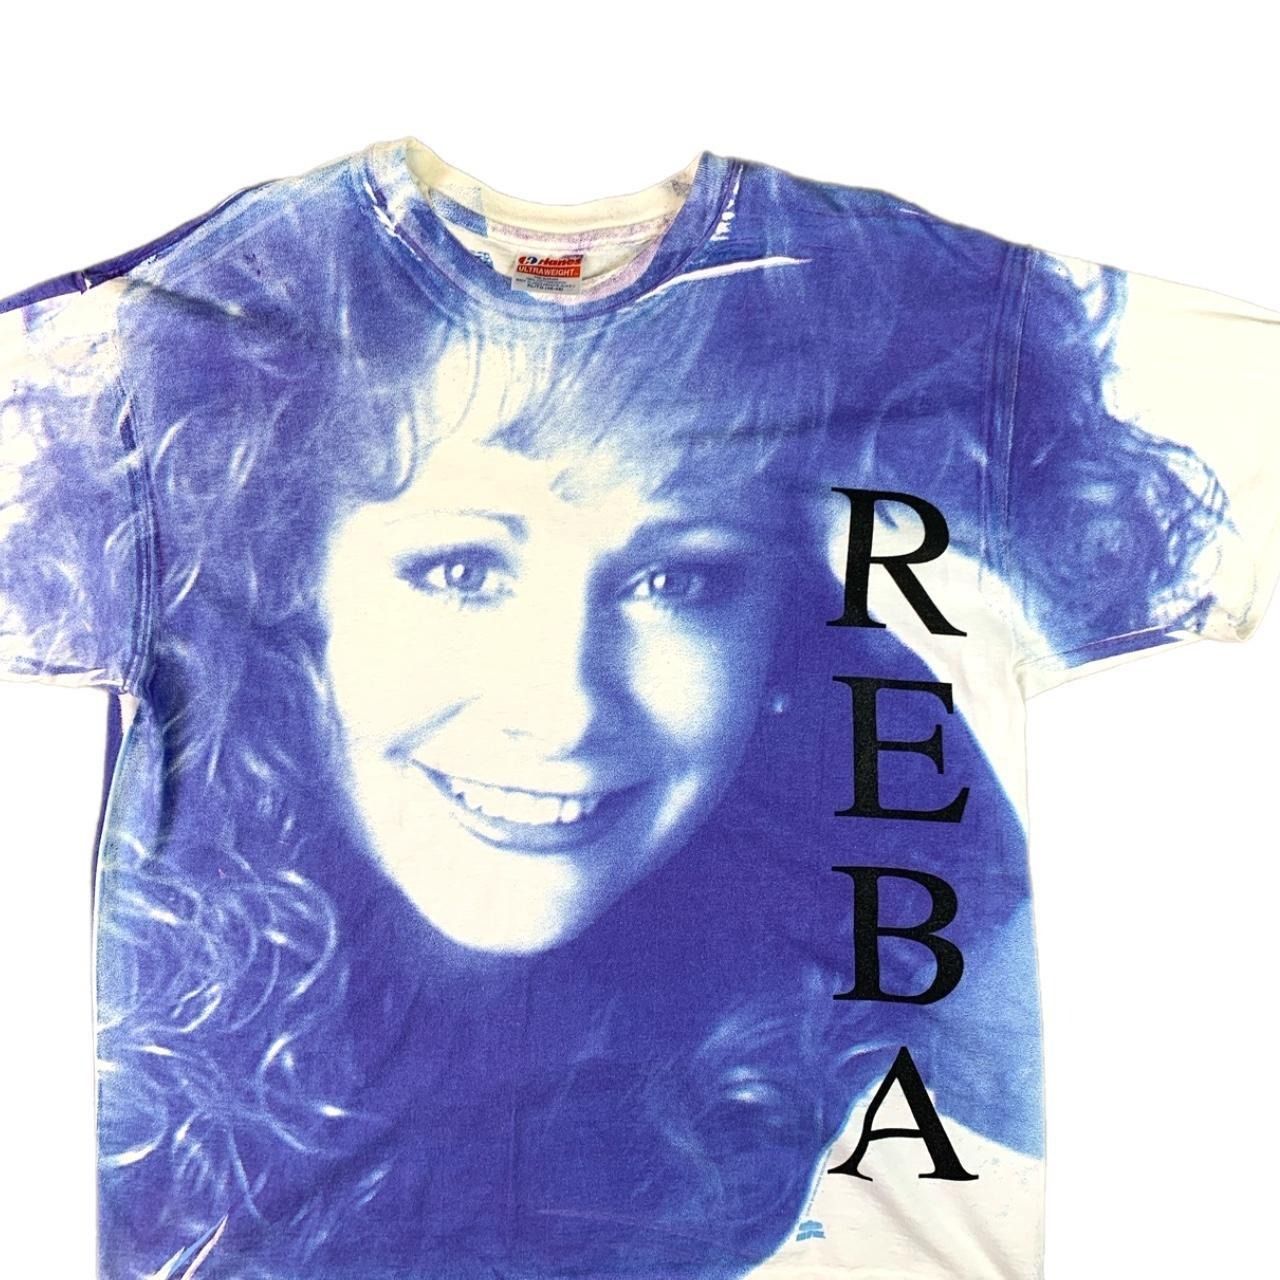 Vintage Vintage 90s Reba Country All Over Print 1992 Band T Shirt Size US XL / EU 56 / 4 - 1 Preview